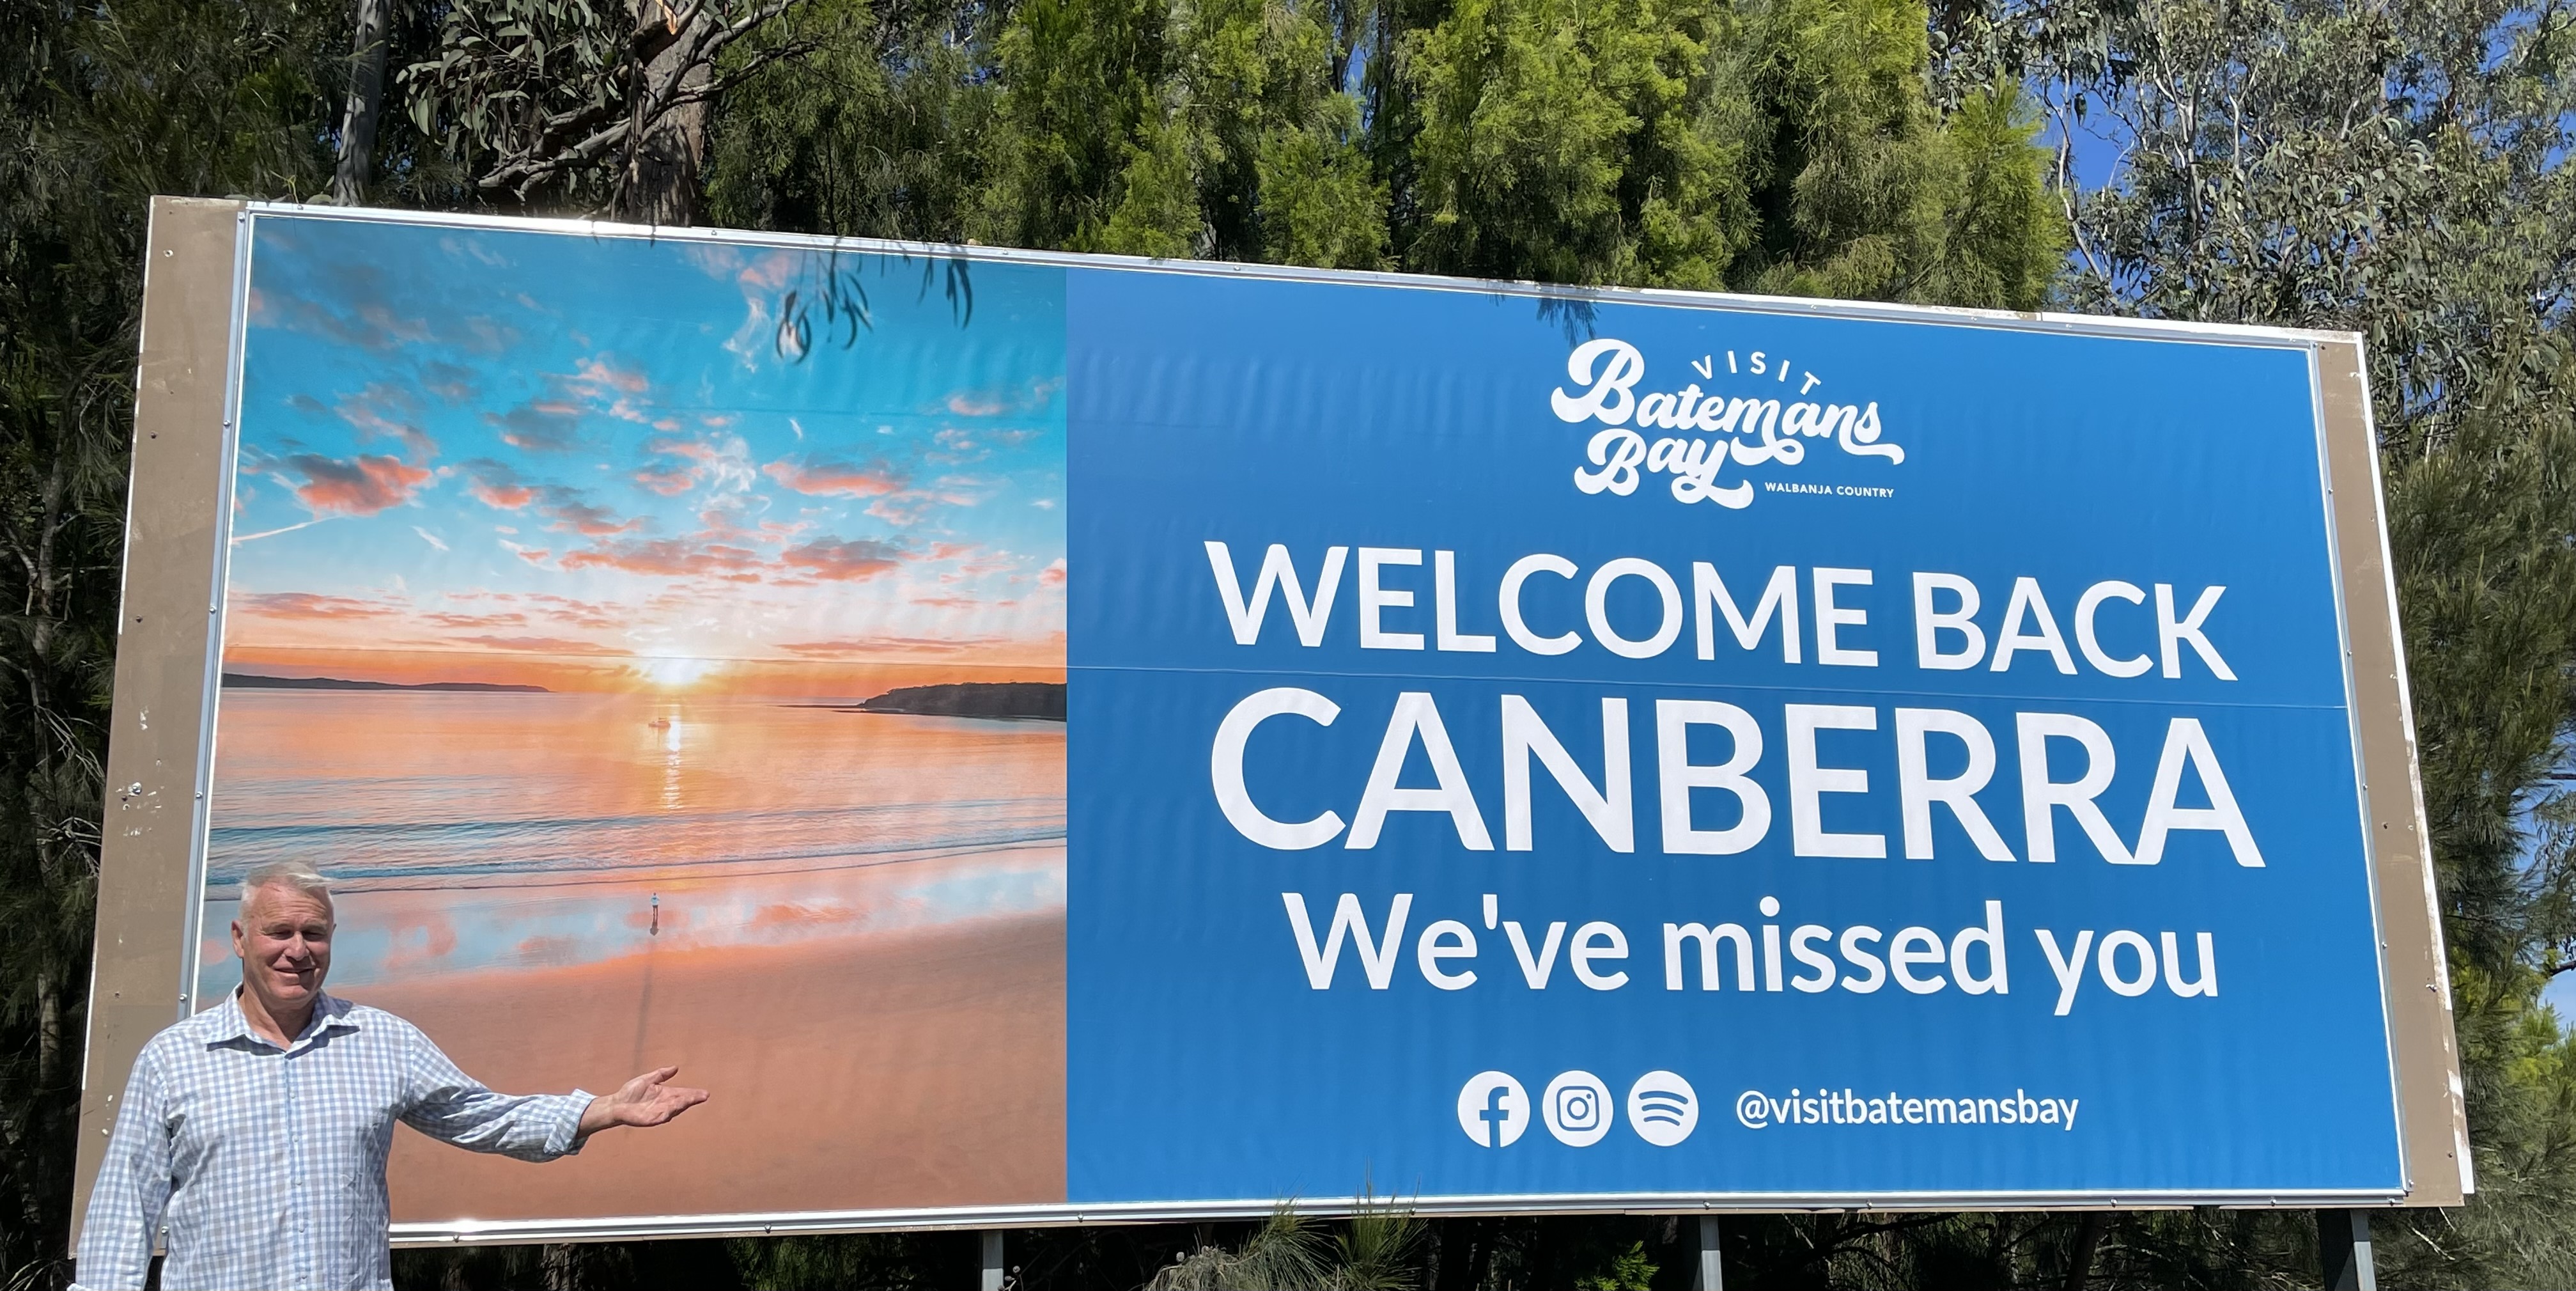 Batemans Bay, Braidwood open their arms to returning Canberrans